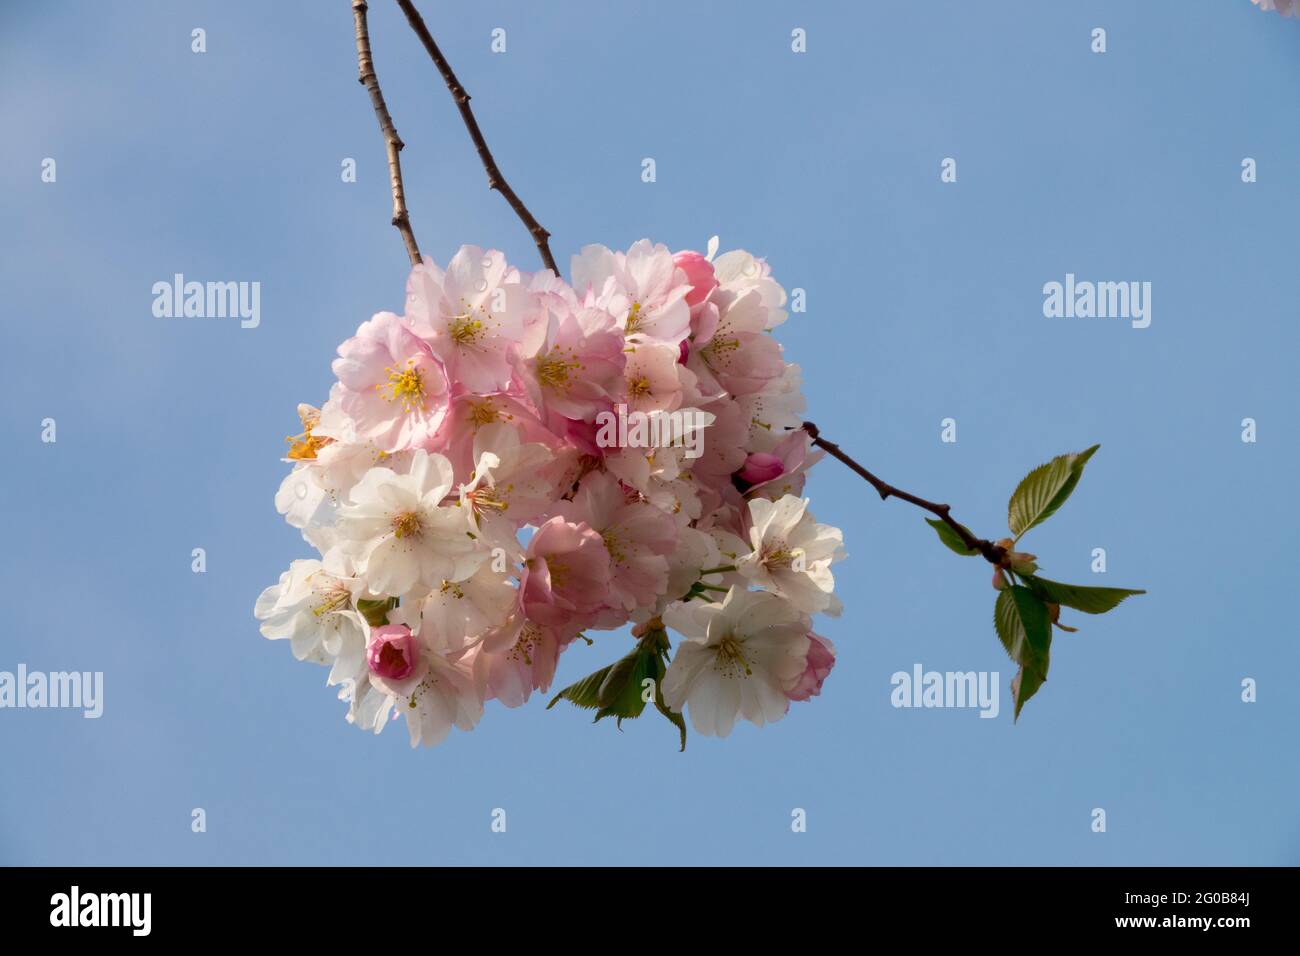 Pink Cherry Blossoms Branch Stock Photo Alamy